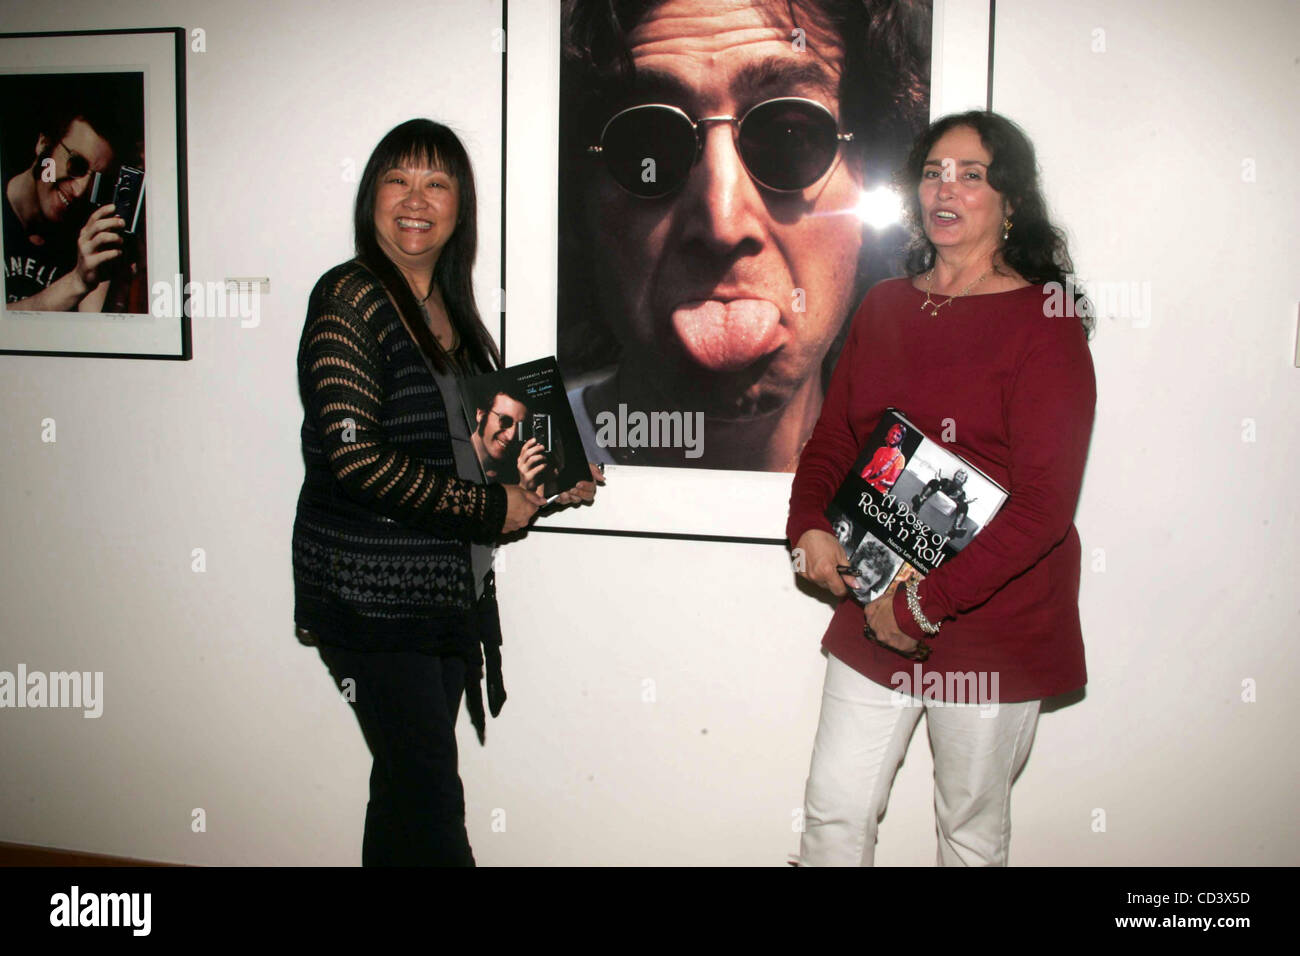 June 11, 2008 - New York, New York, U.S. - MAY PANG, JOHN LENNON'S FORMER GIRLFRIEND A HAS  A BOOK PARTY TO PROMOTE HER BOOK, ''INSTAMATIC KARMA'' ALONG WITH NANCY LEE ANDREWS (RINGO STARR'S FORMER GIRLFRIEND) TO PROMOTE HER NEWLY RELEASED BOOK, '' A DOSE OF ROCK ''N'' ROLL'' AT THE JUNE KELLY GALLE Stock Photo